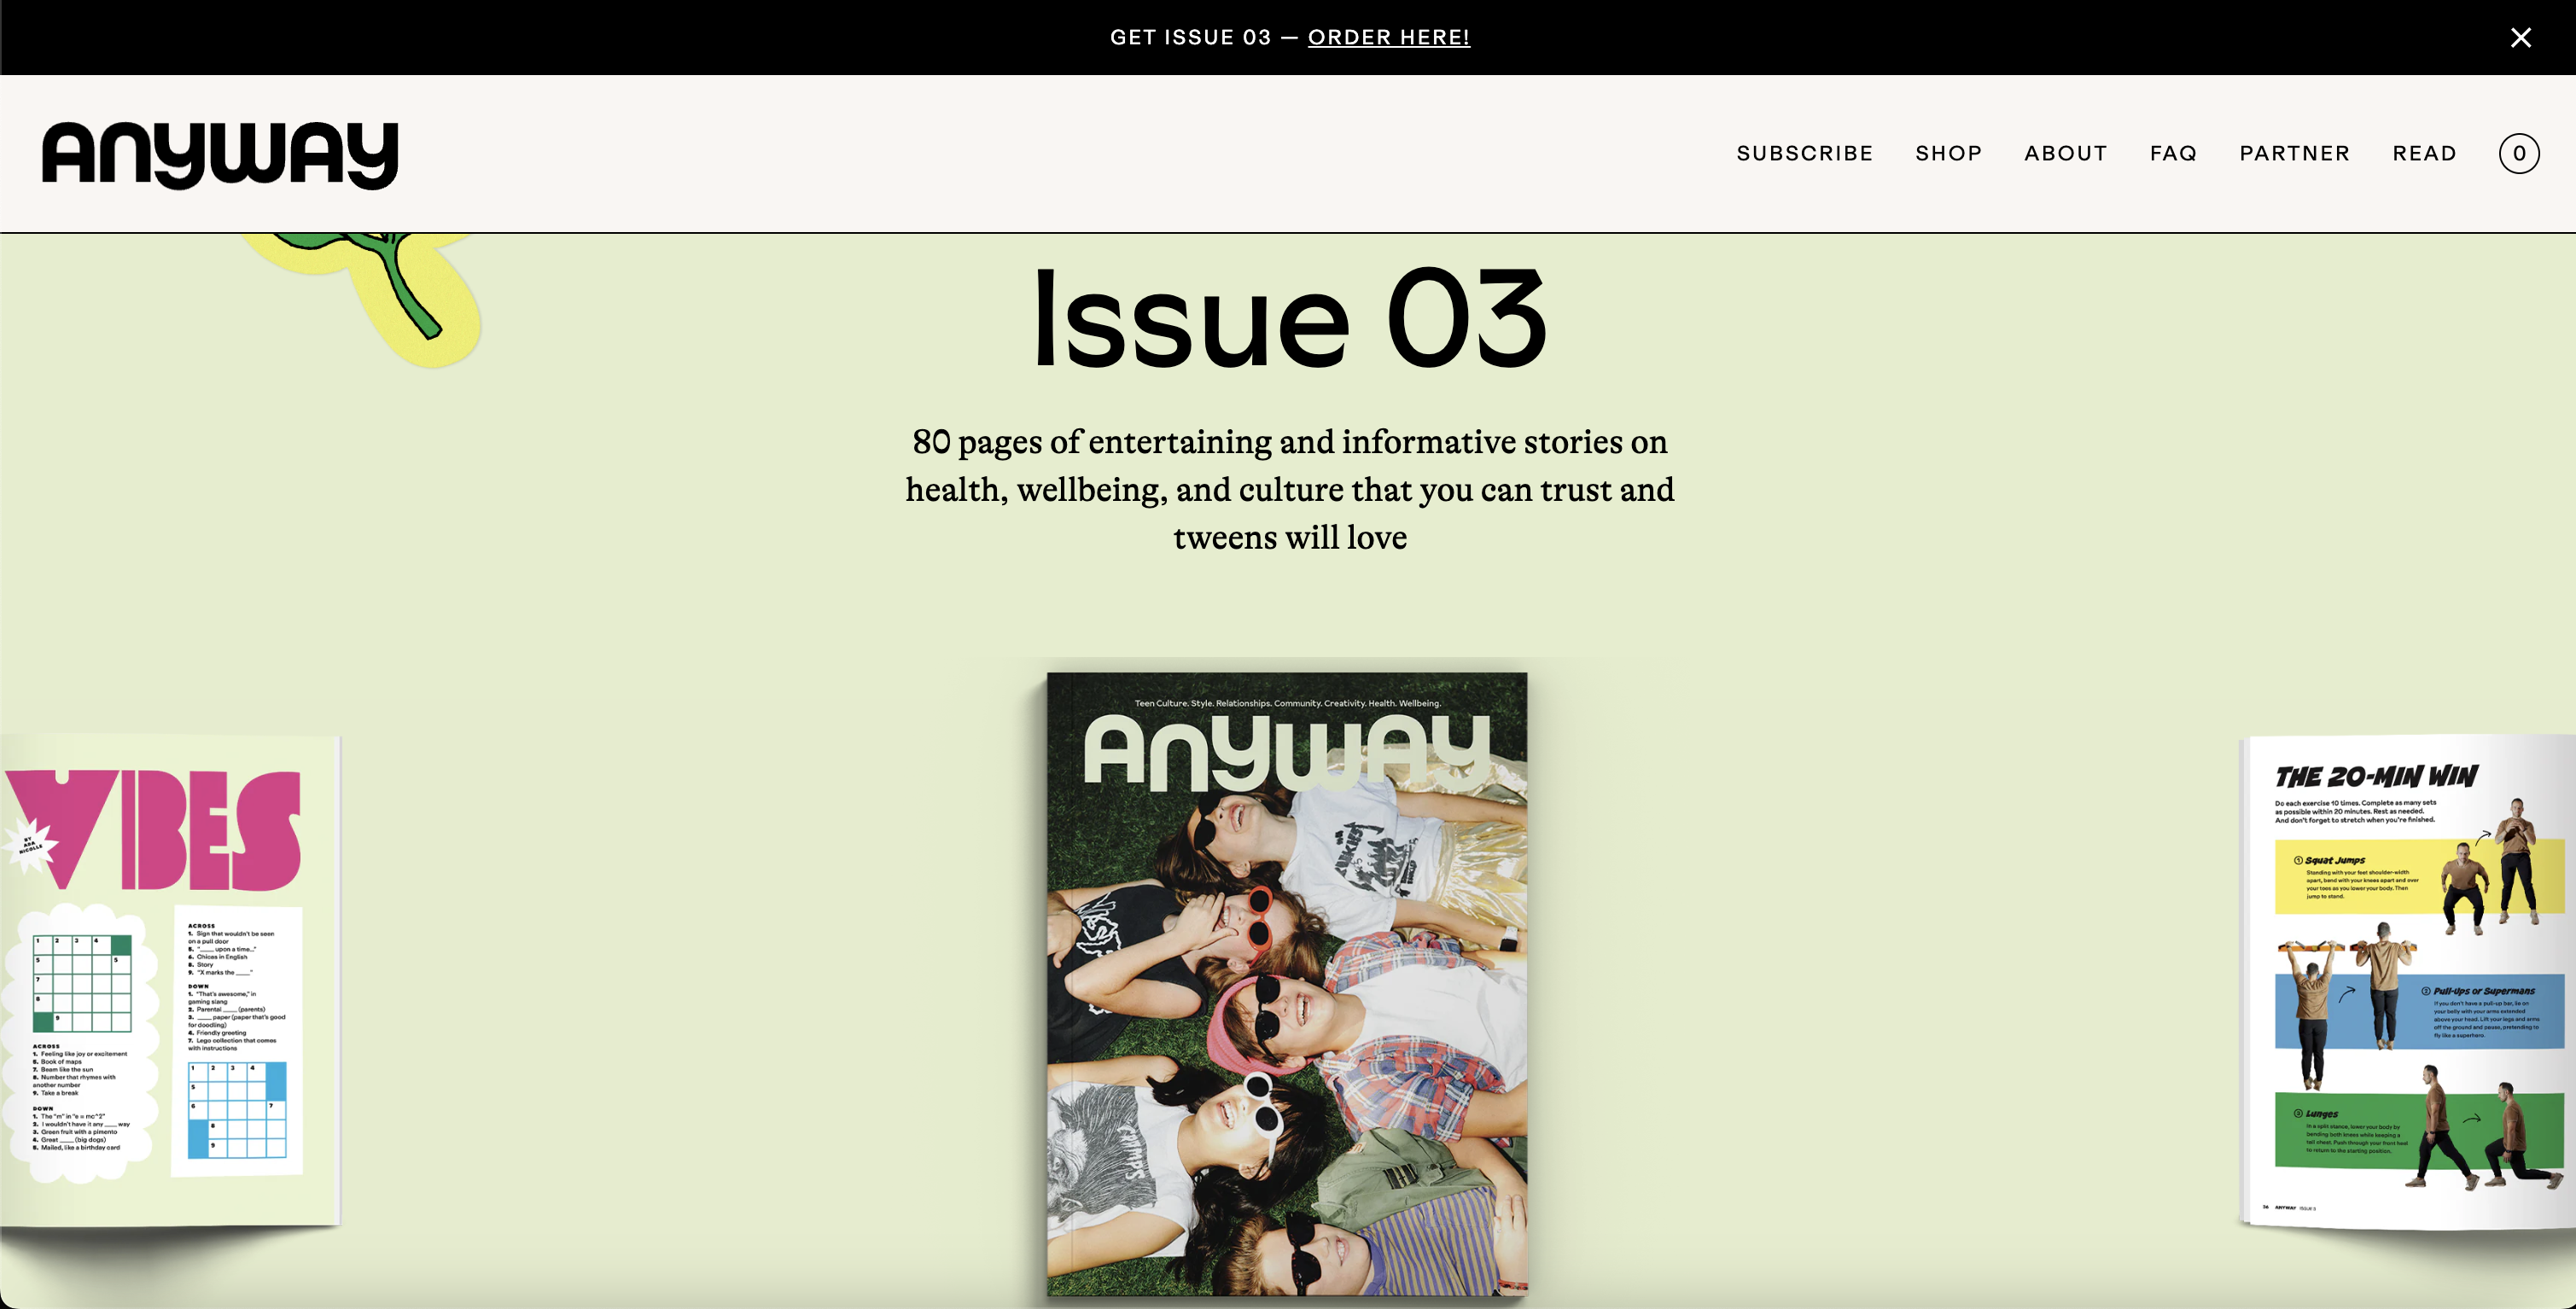  AnywayMag.com review and numerous online issues